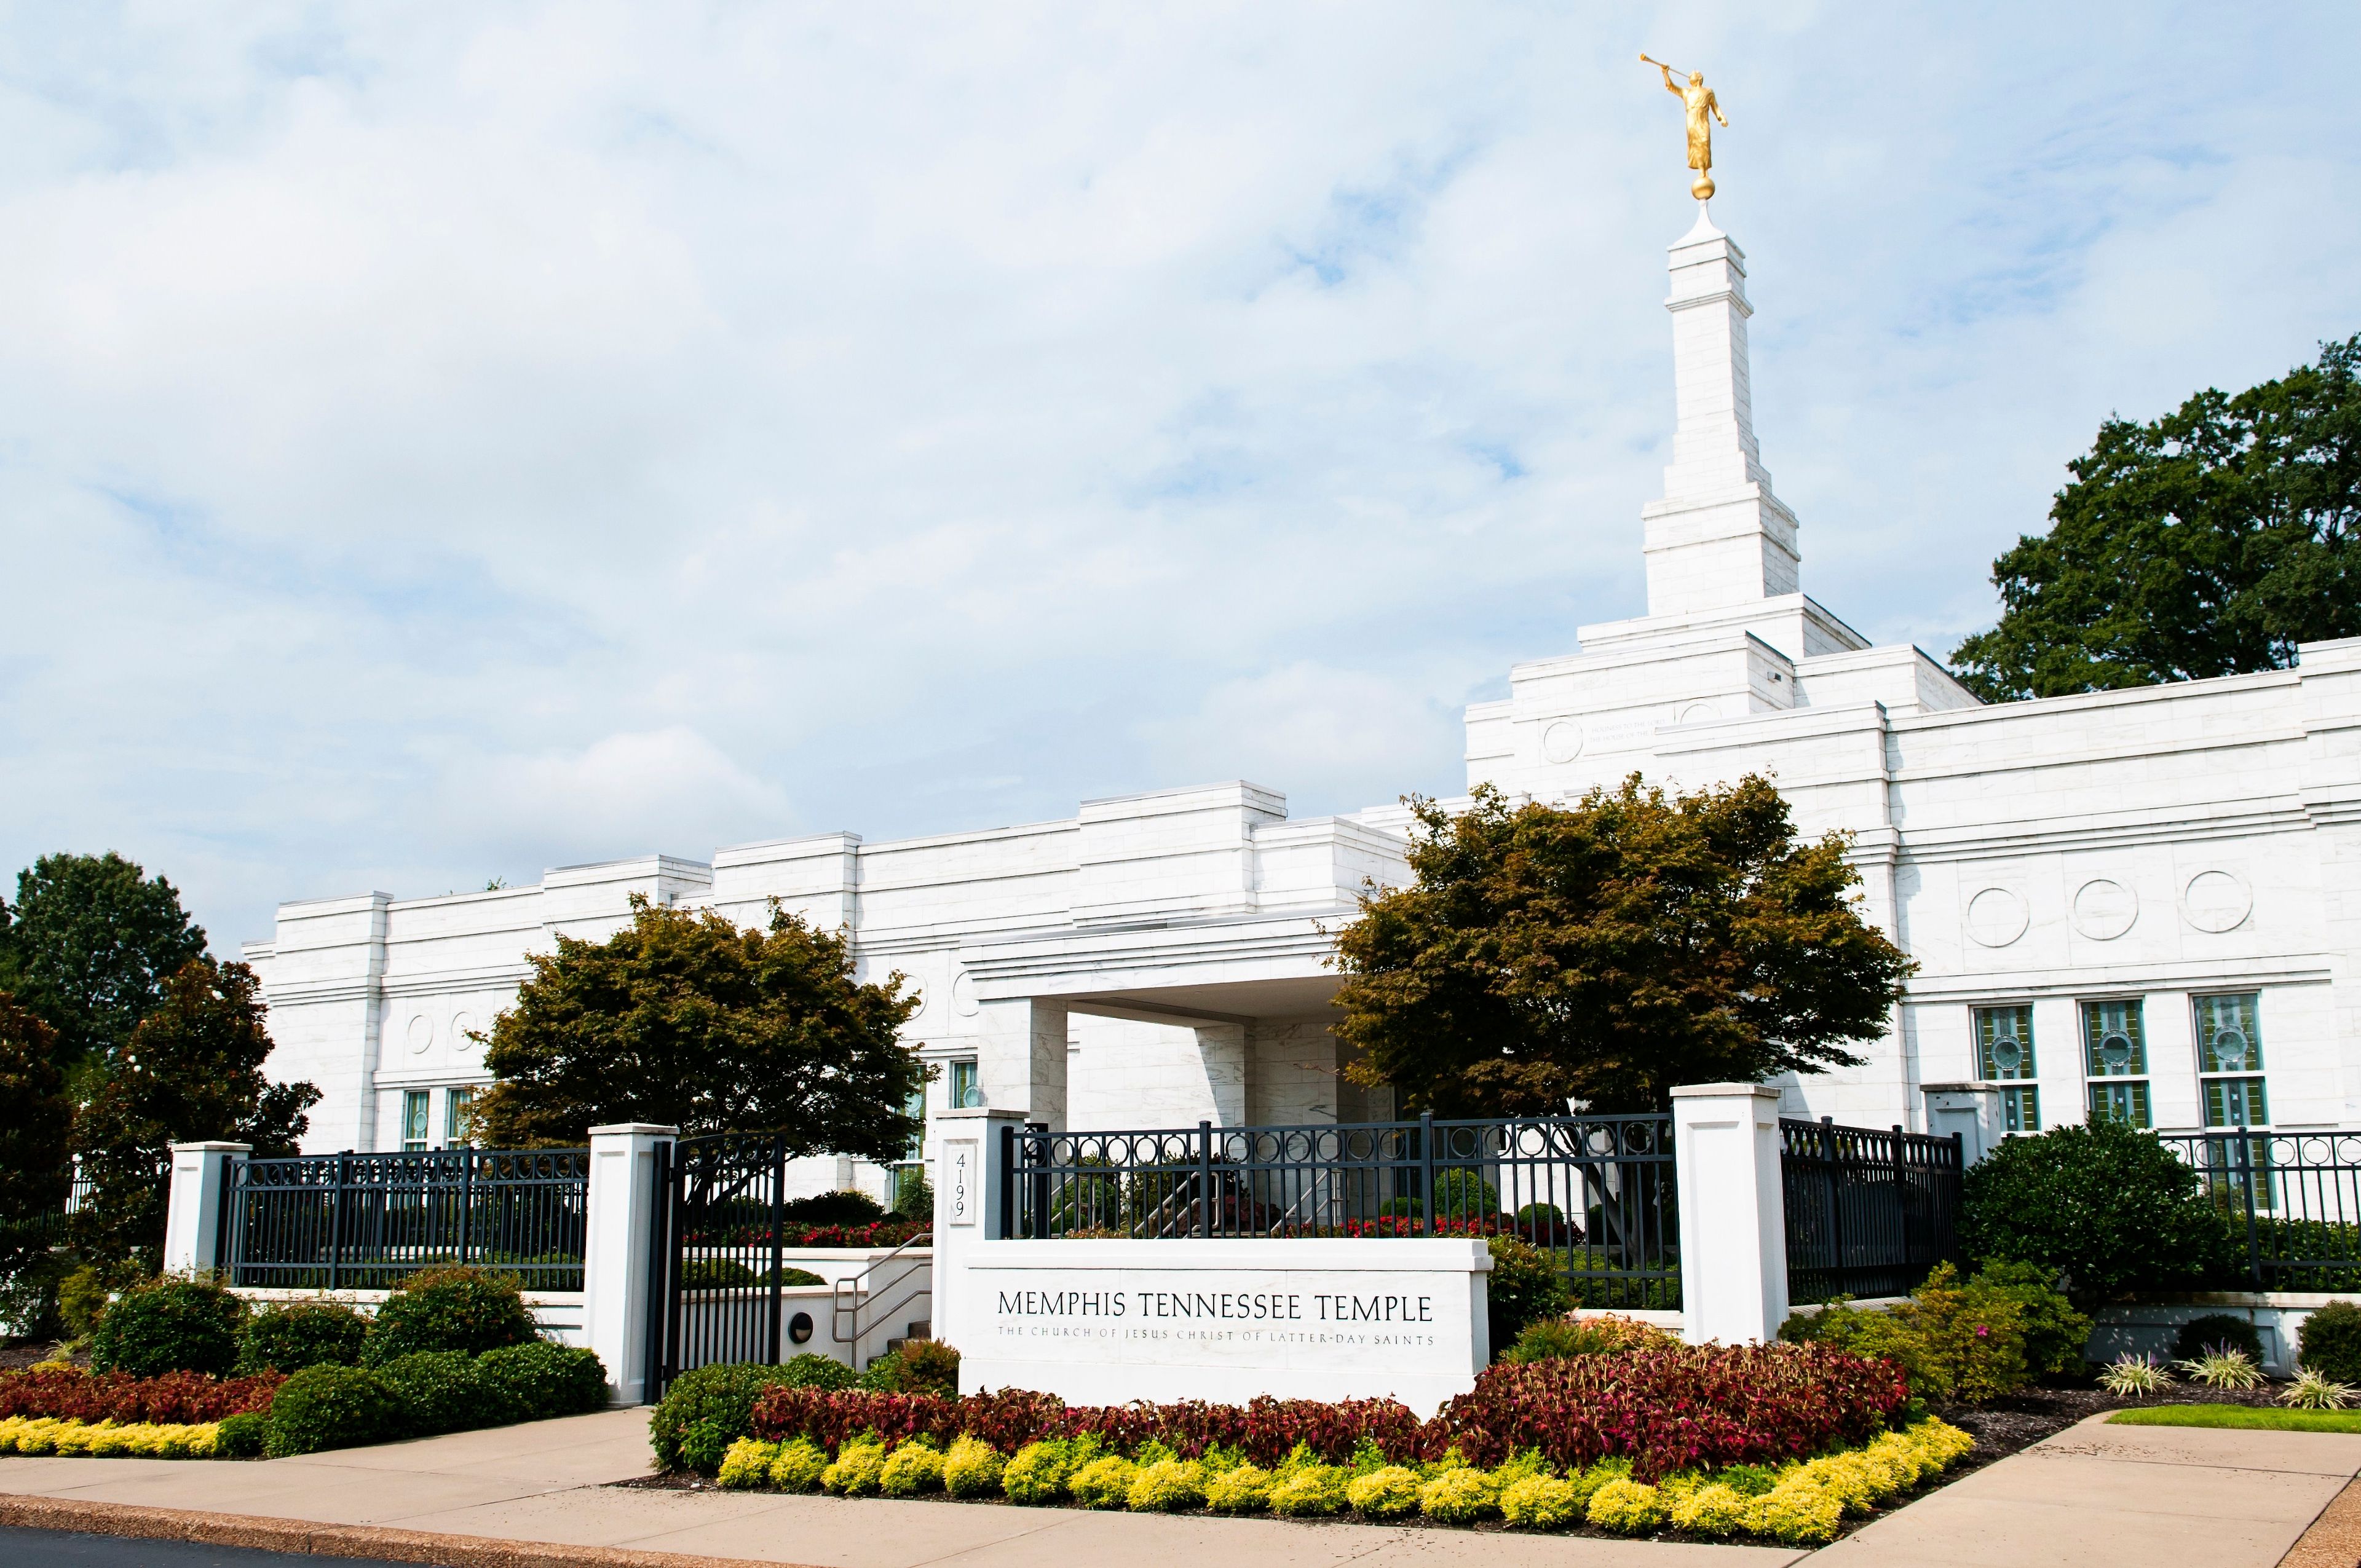 The Memphis Tennessee Temple sign in front of the temple.